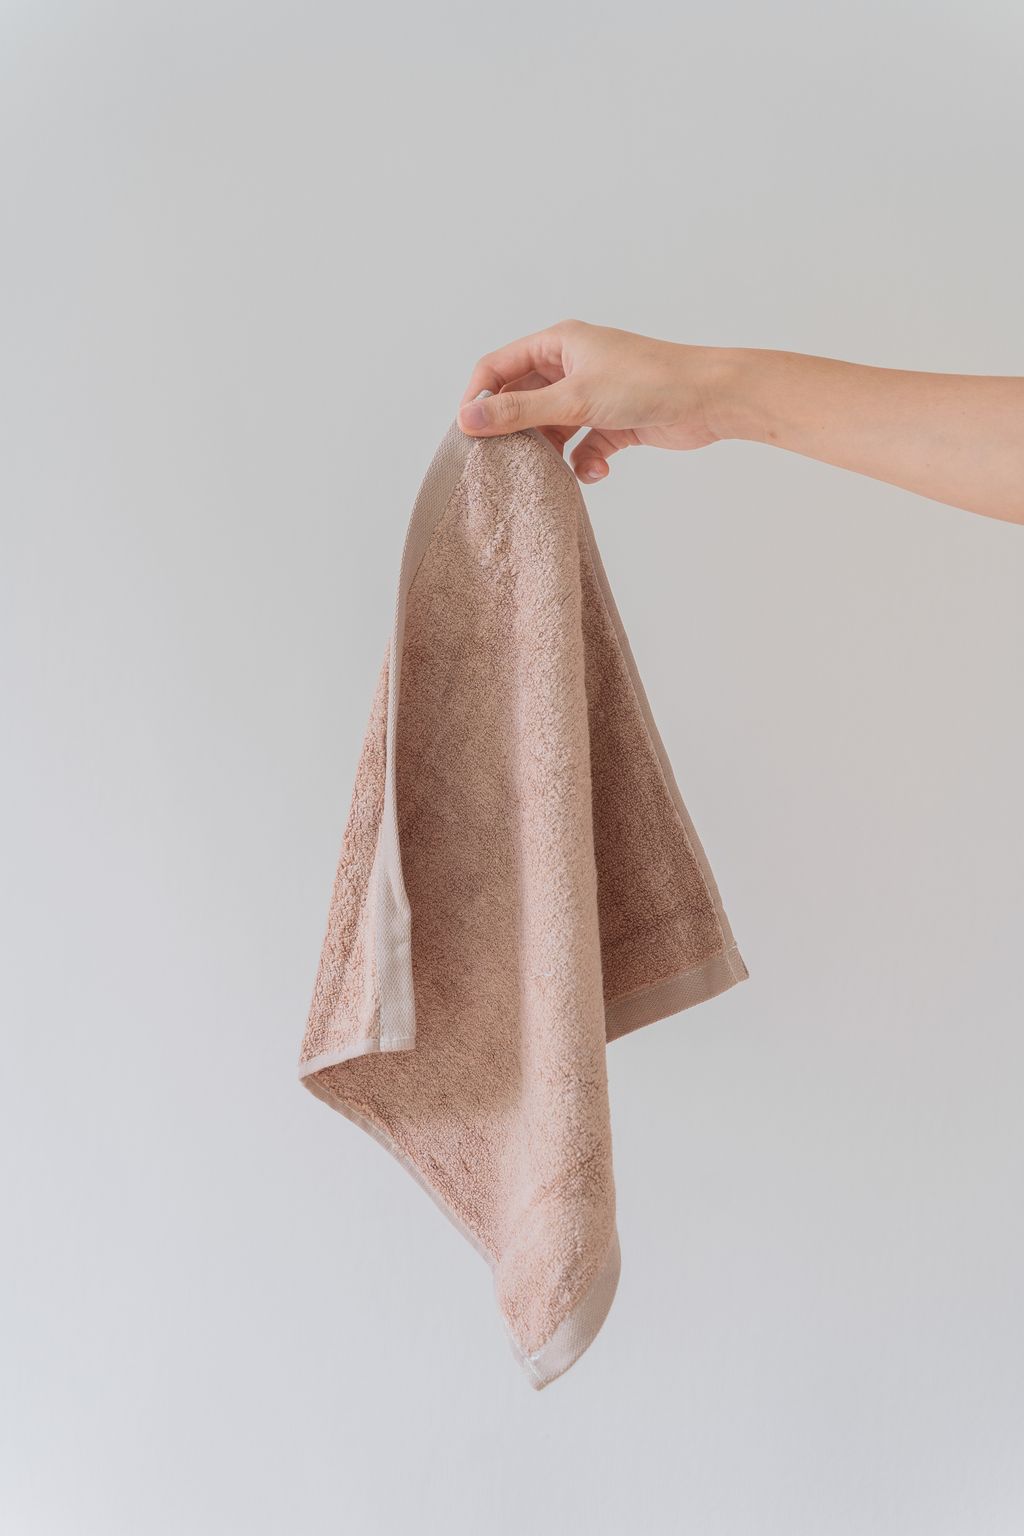 Bamboo Towel, Face towel. Soft & Silky, Quick Drying